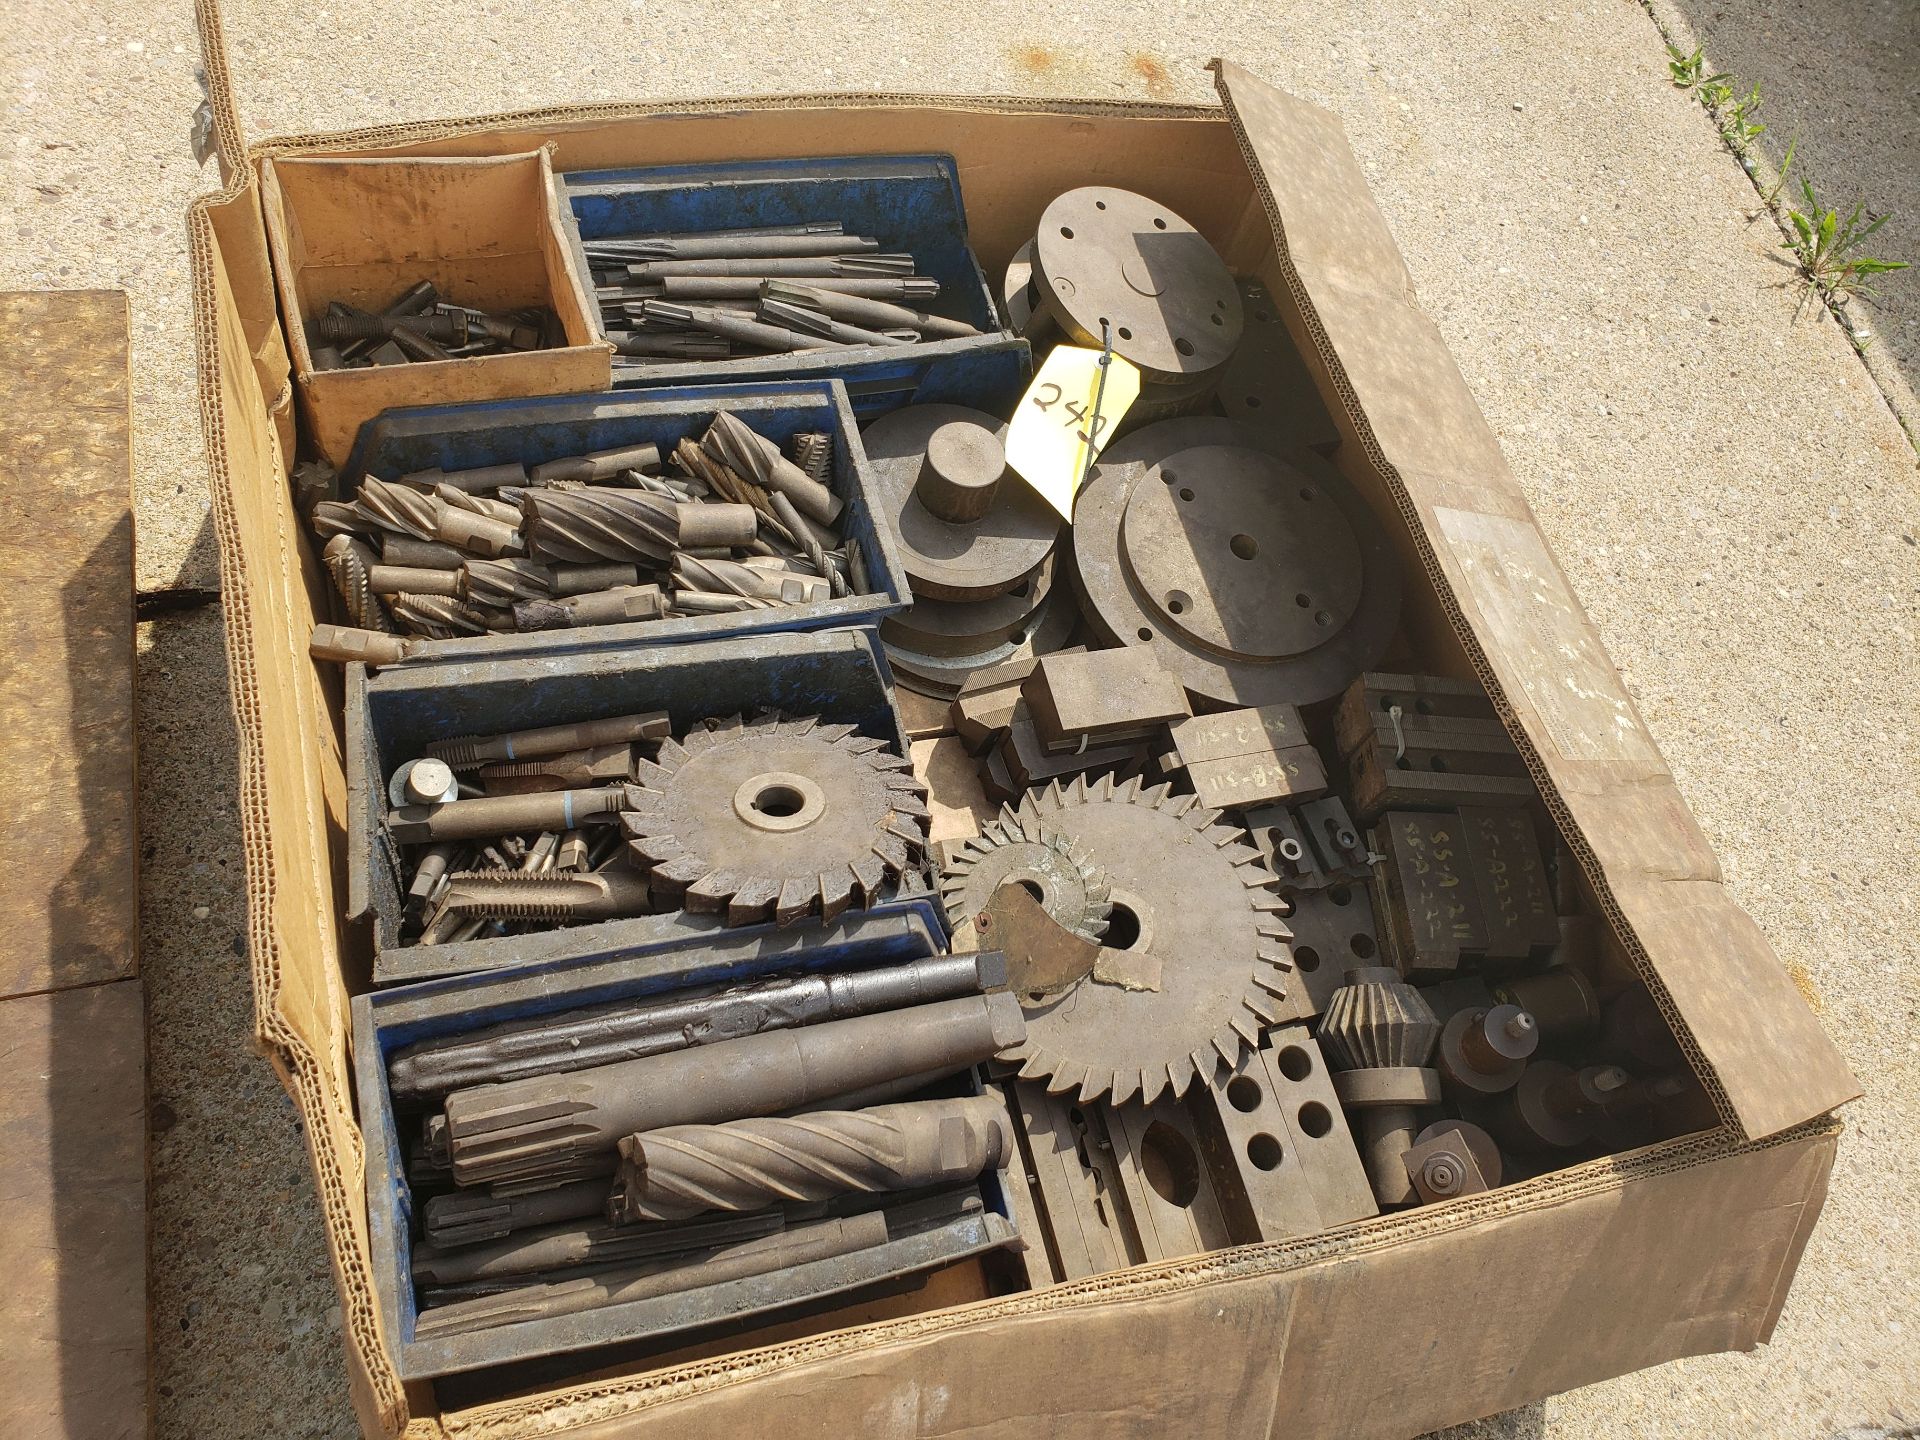 SKID OF CUTTERS & END MILLS